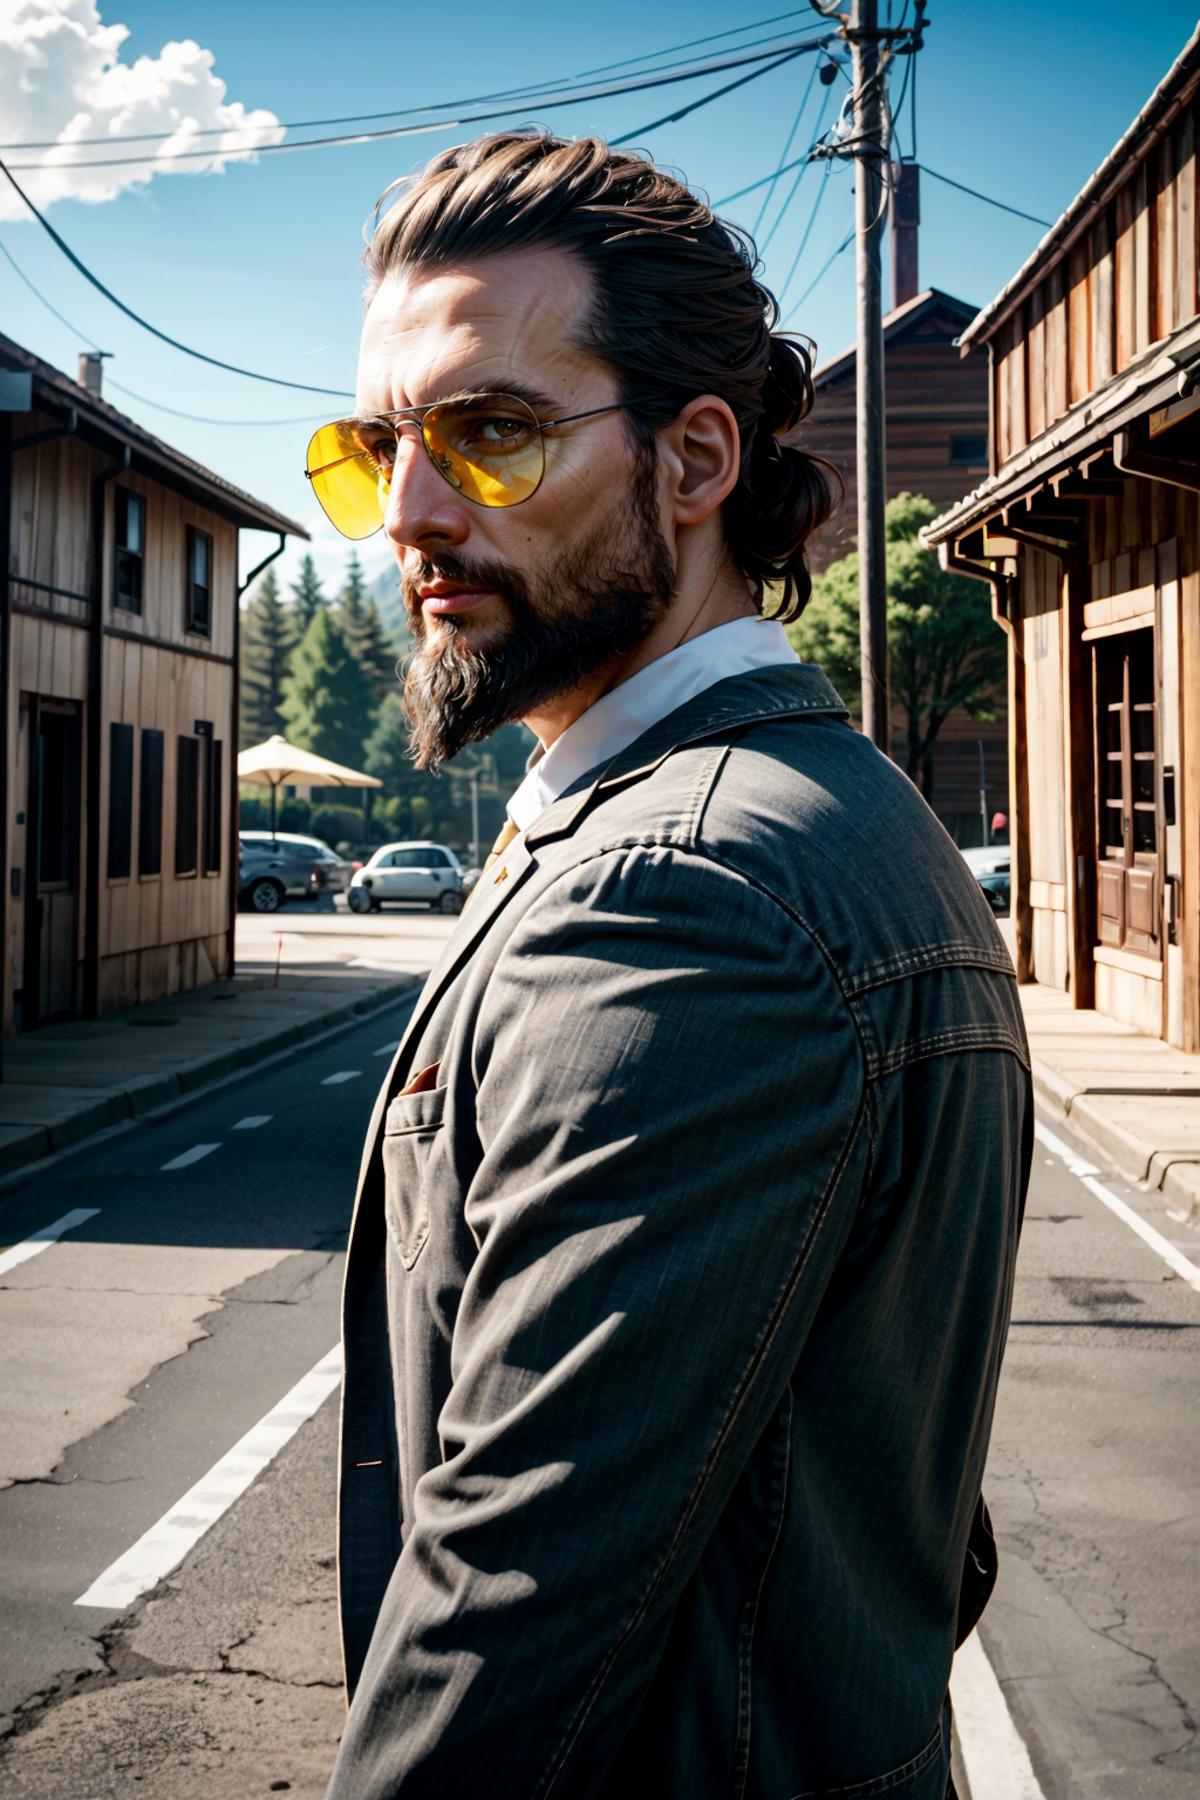 Joseph Seed from Far Cry 5 image by BloodRedKittie